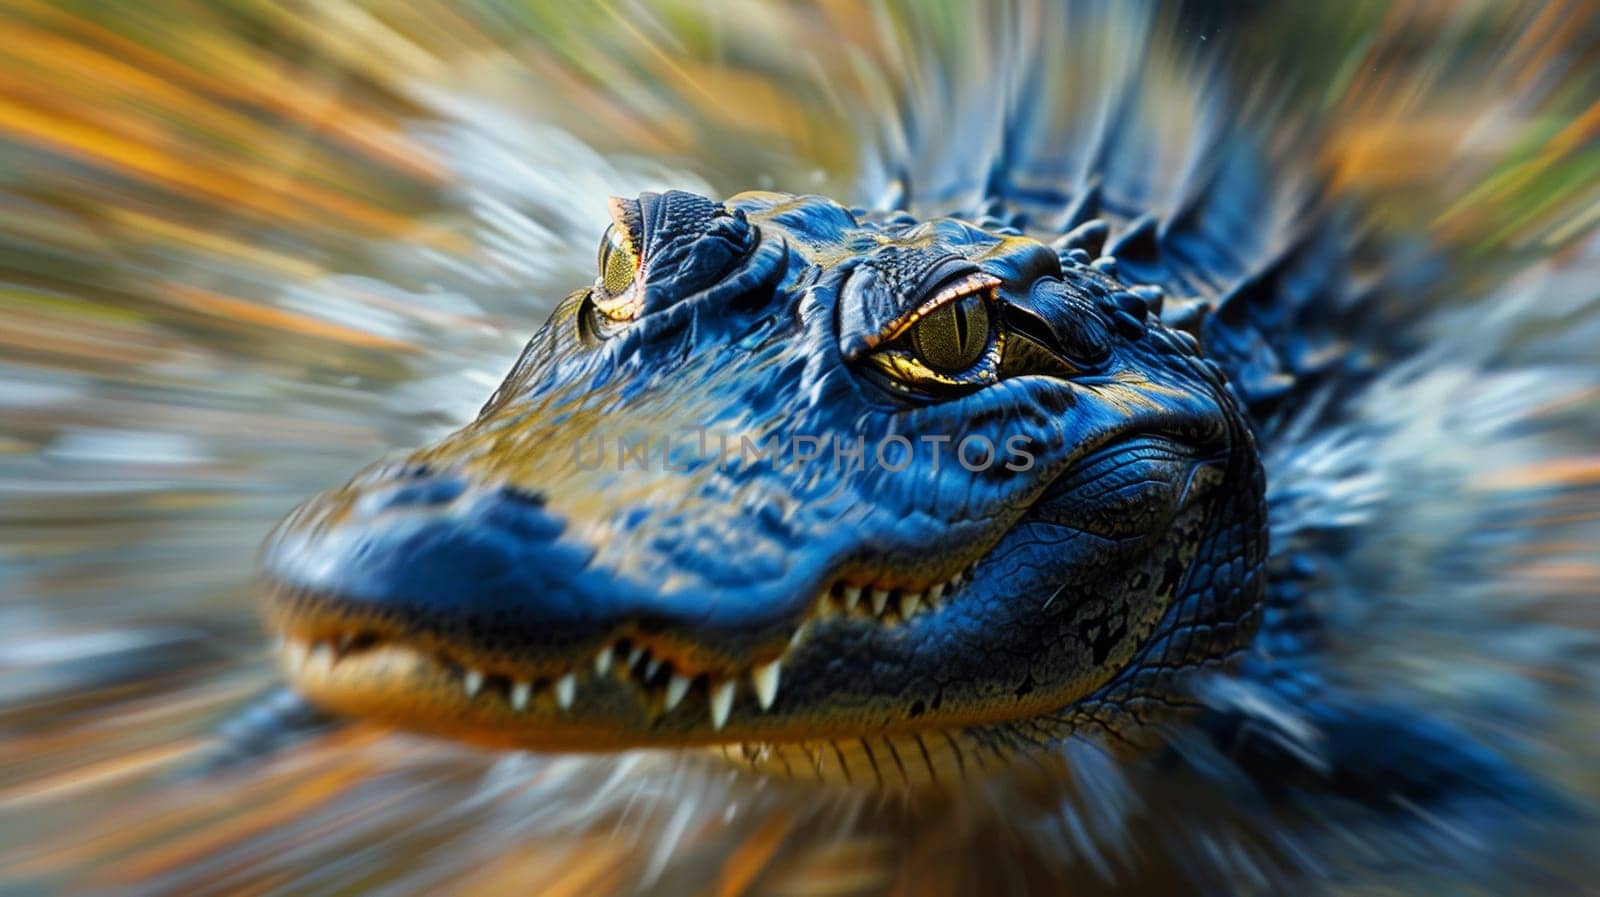 A close up of a blue alligator with its mouth open, AI by starush